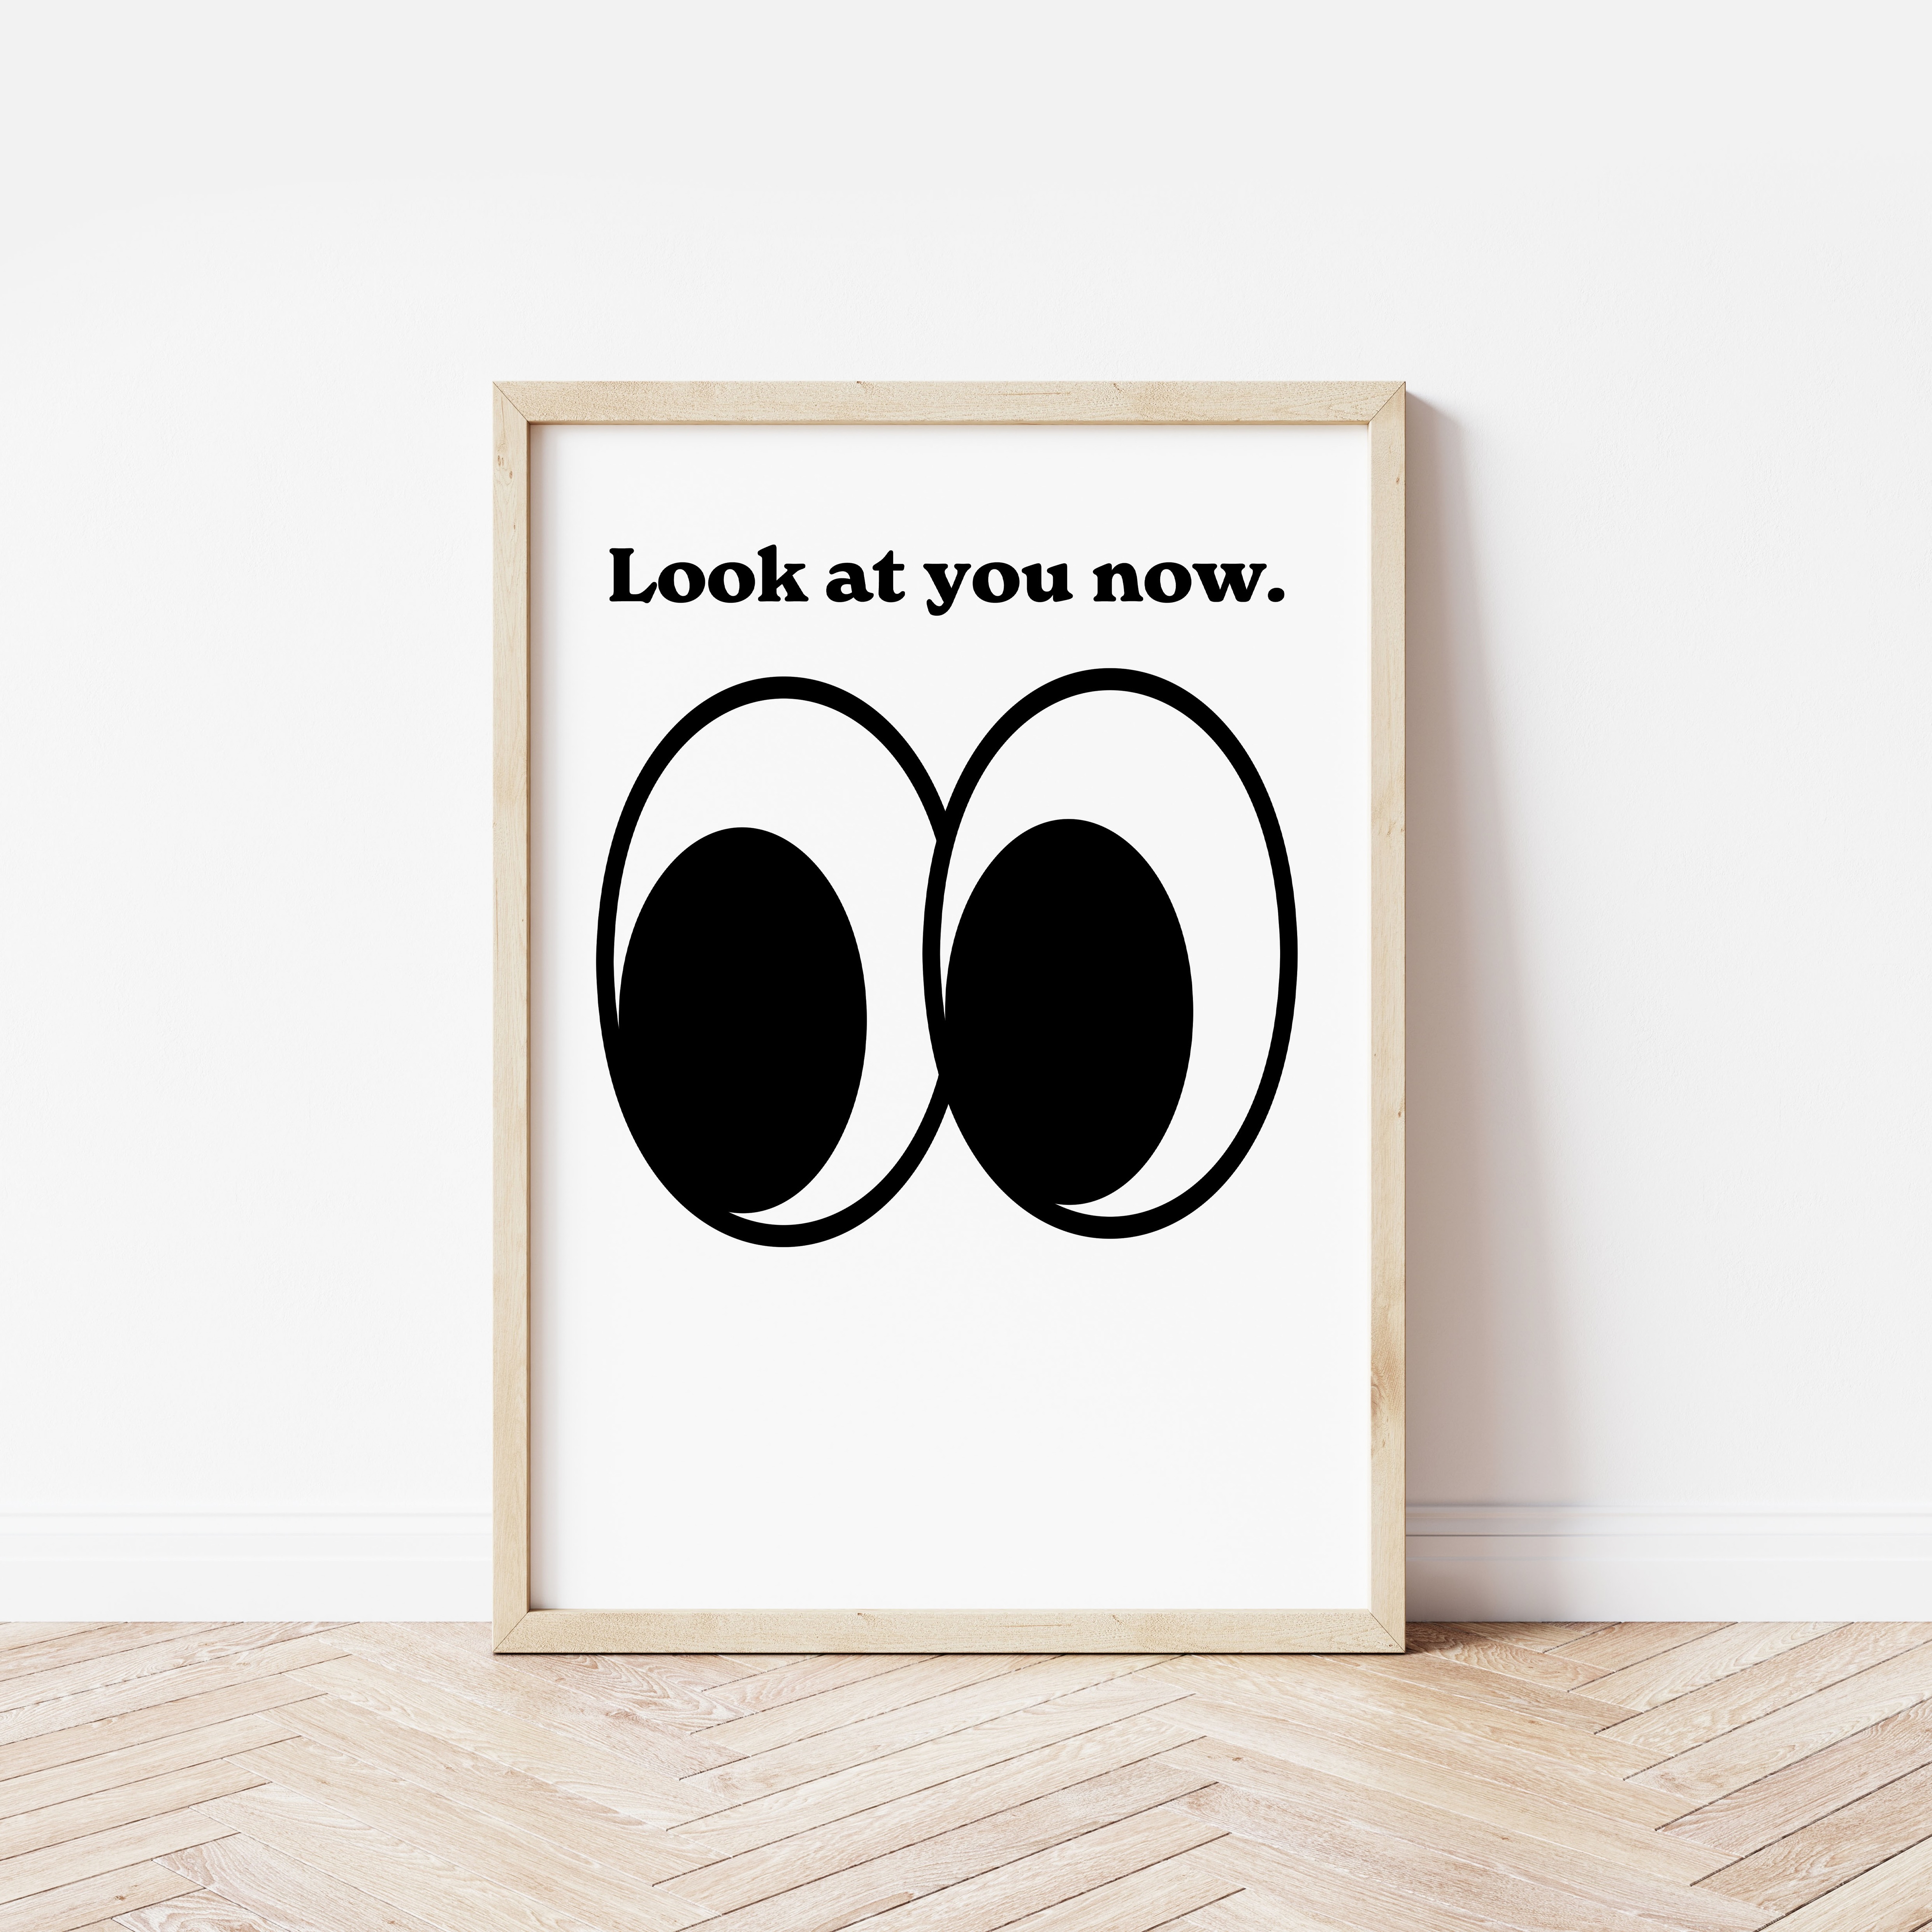 Sofe Store A3 Look At You Now Print